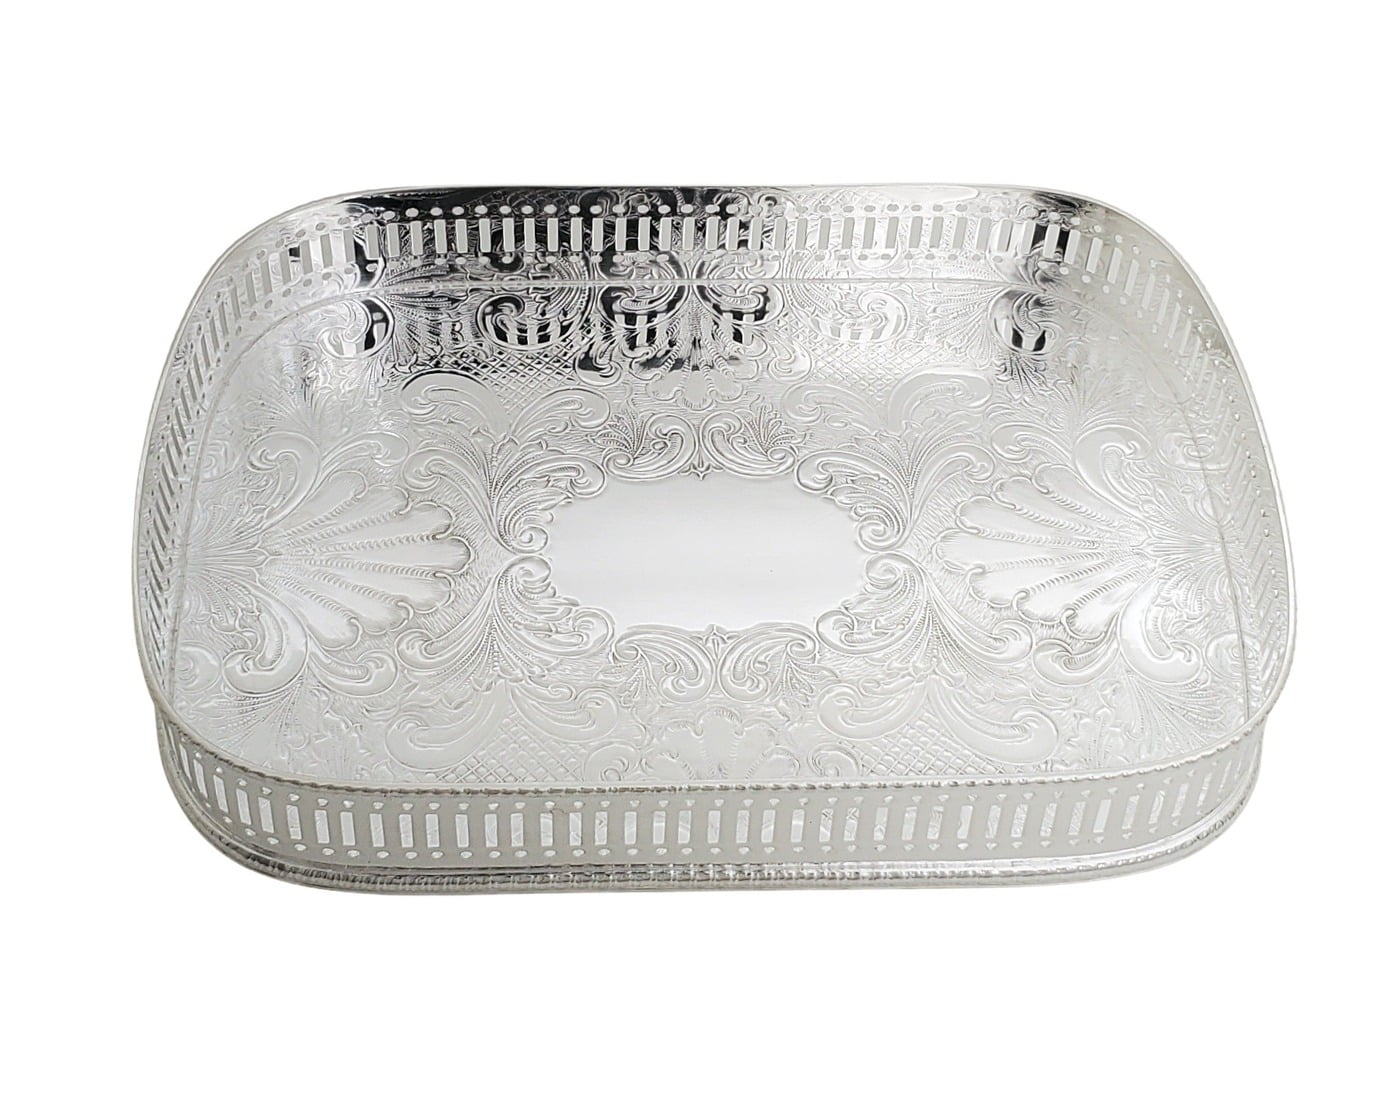 TRAY RECTANGULAR SILVER PLATED